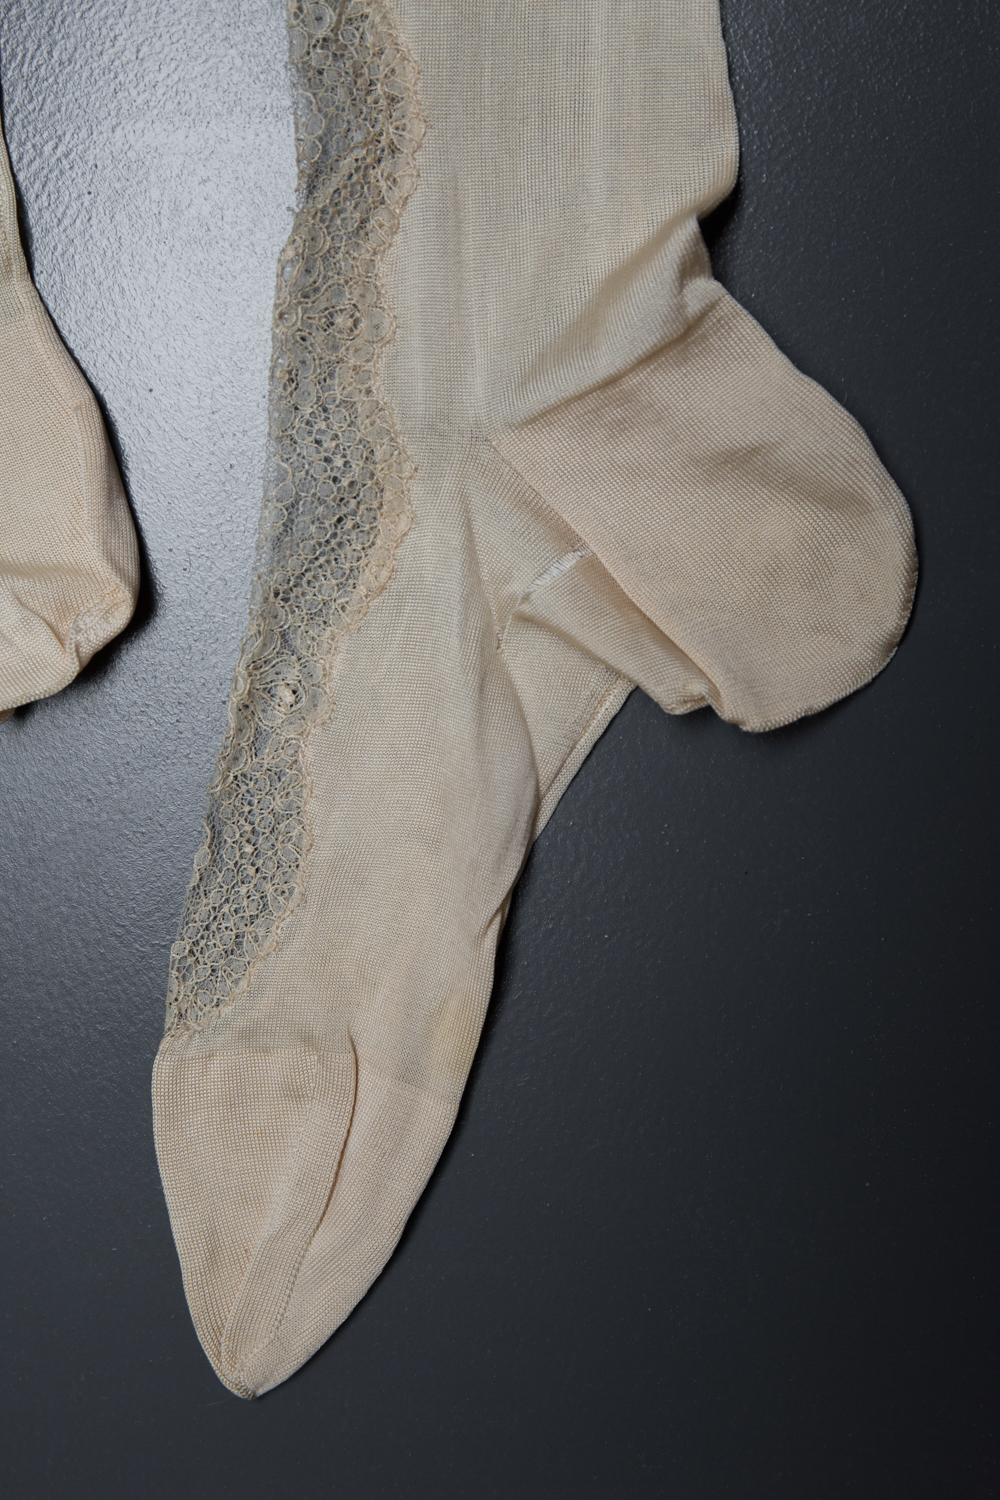 Cream Silk Stockings With Lace Inserts, c. 1900s, USA. The Underpinnings Museum. Photography by Tigz Rice